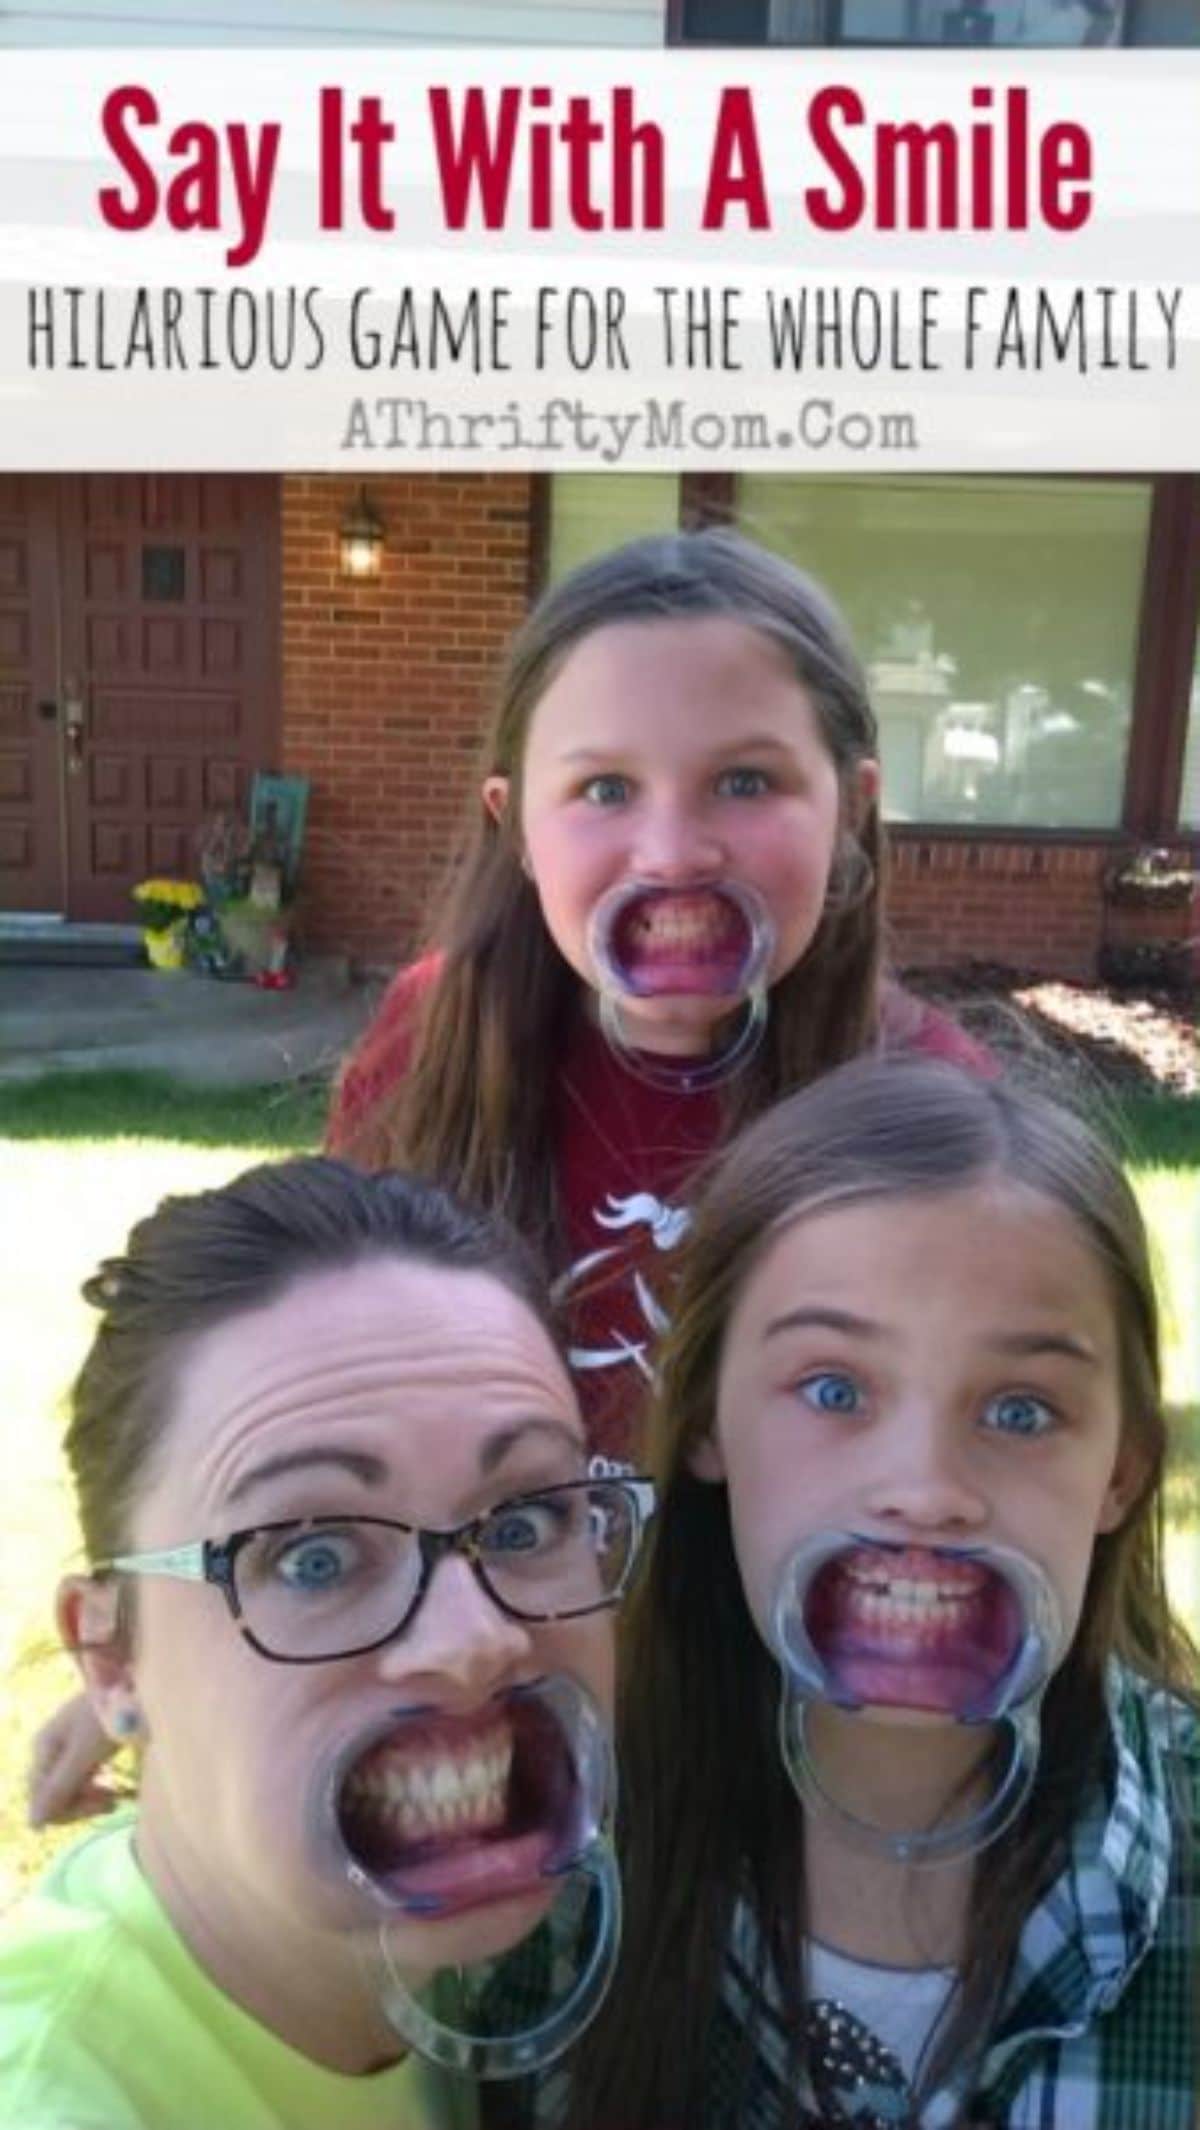 The text reads "Say it with a smile. Hilarious game for the whole family. AThriftyMom.com" The image is of 2 girls and a woman with retainers in their mouths